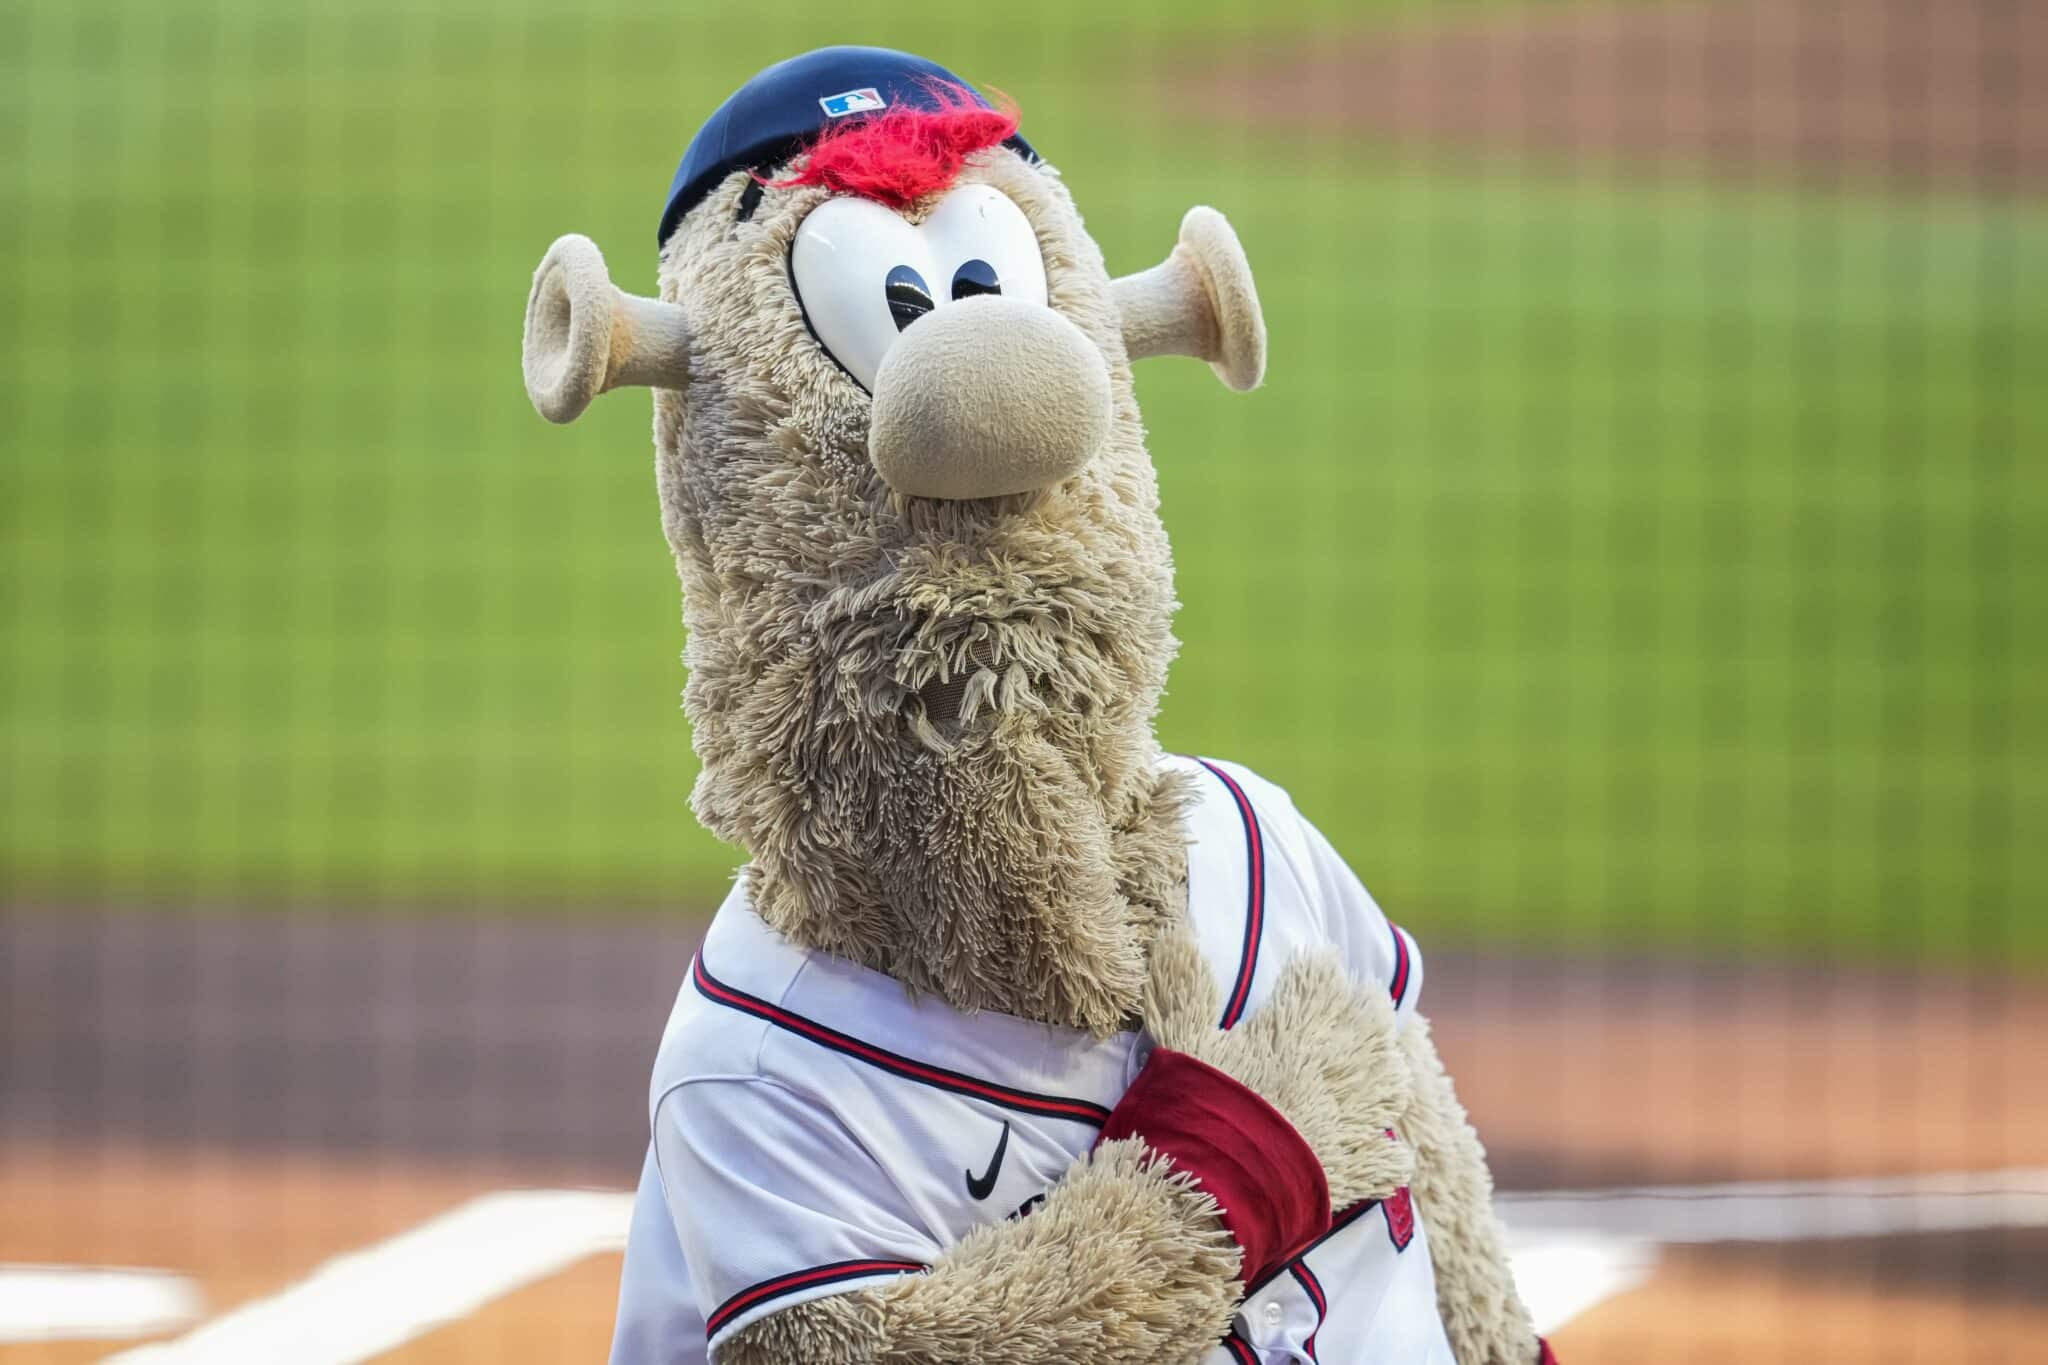 Braves mascot thinks Gary Cohen's opinion of him is absolute trash